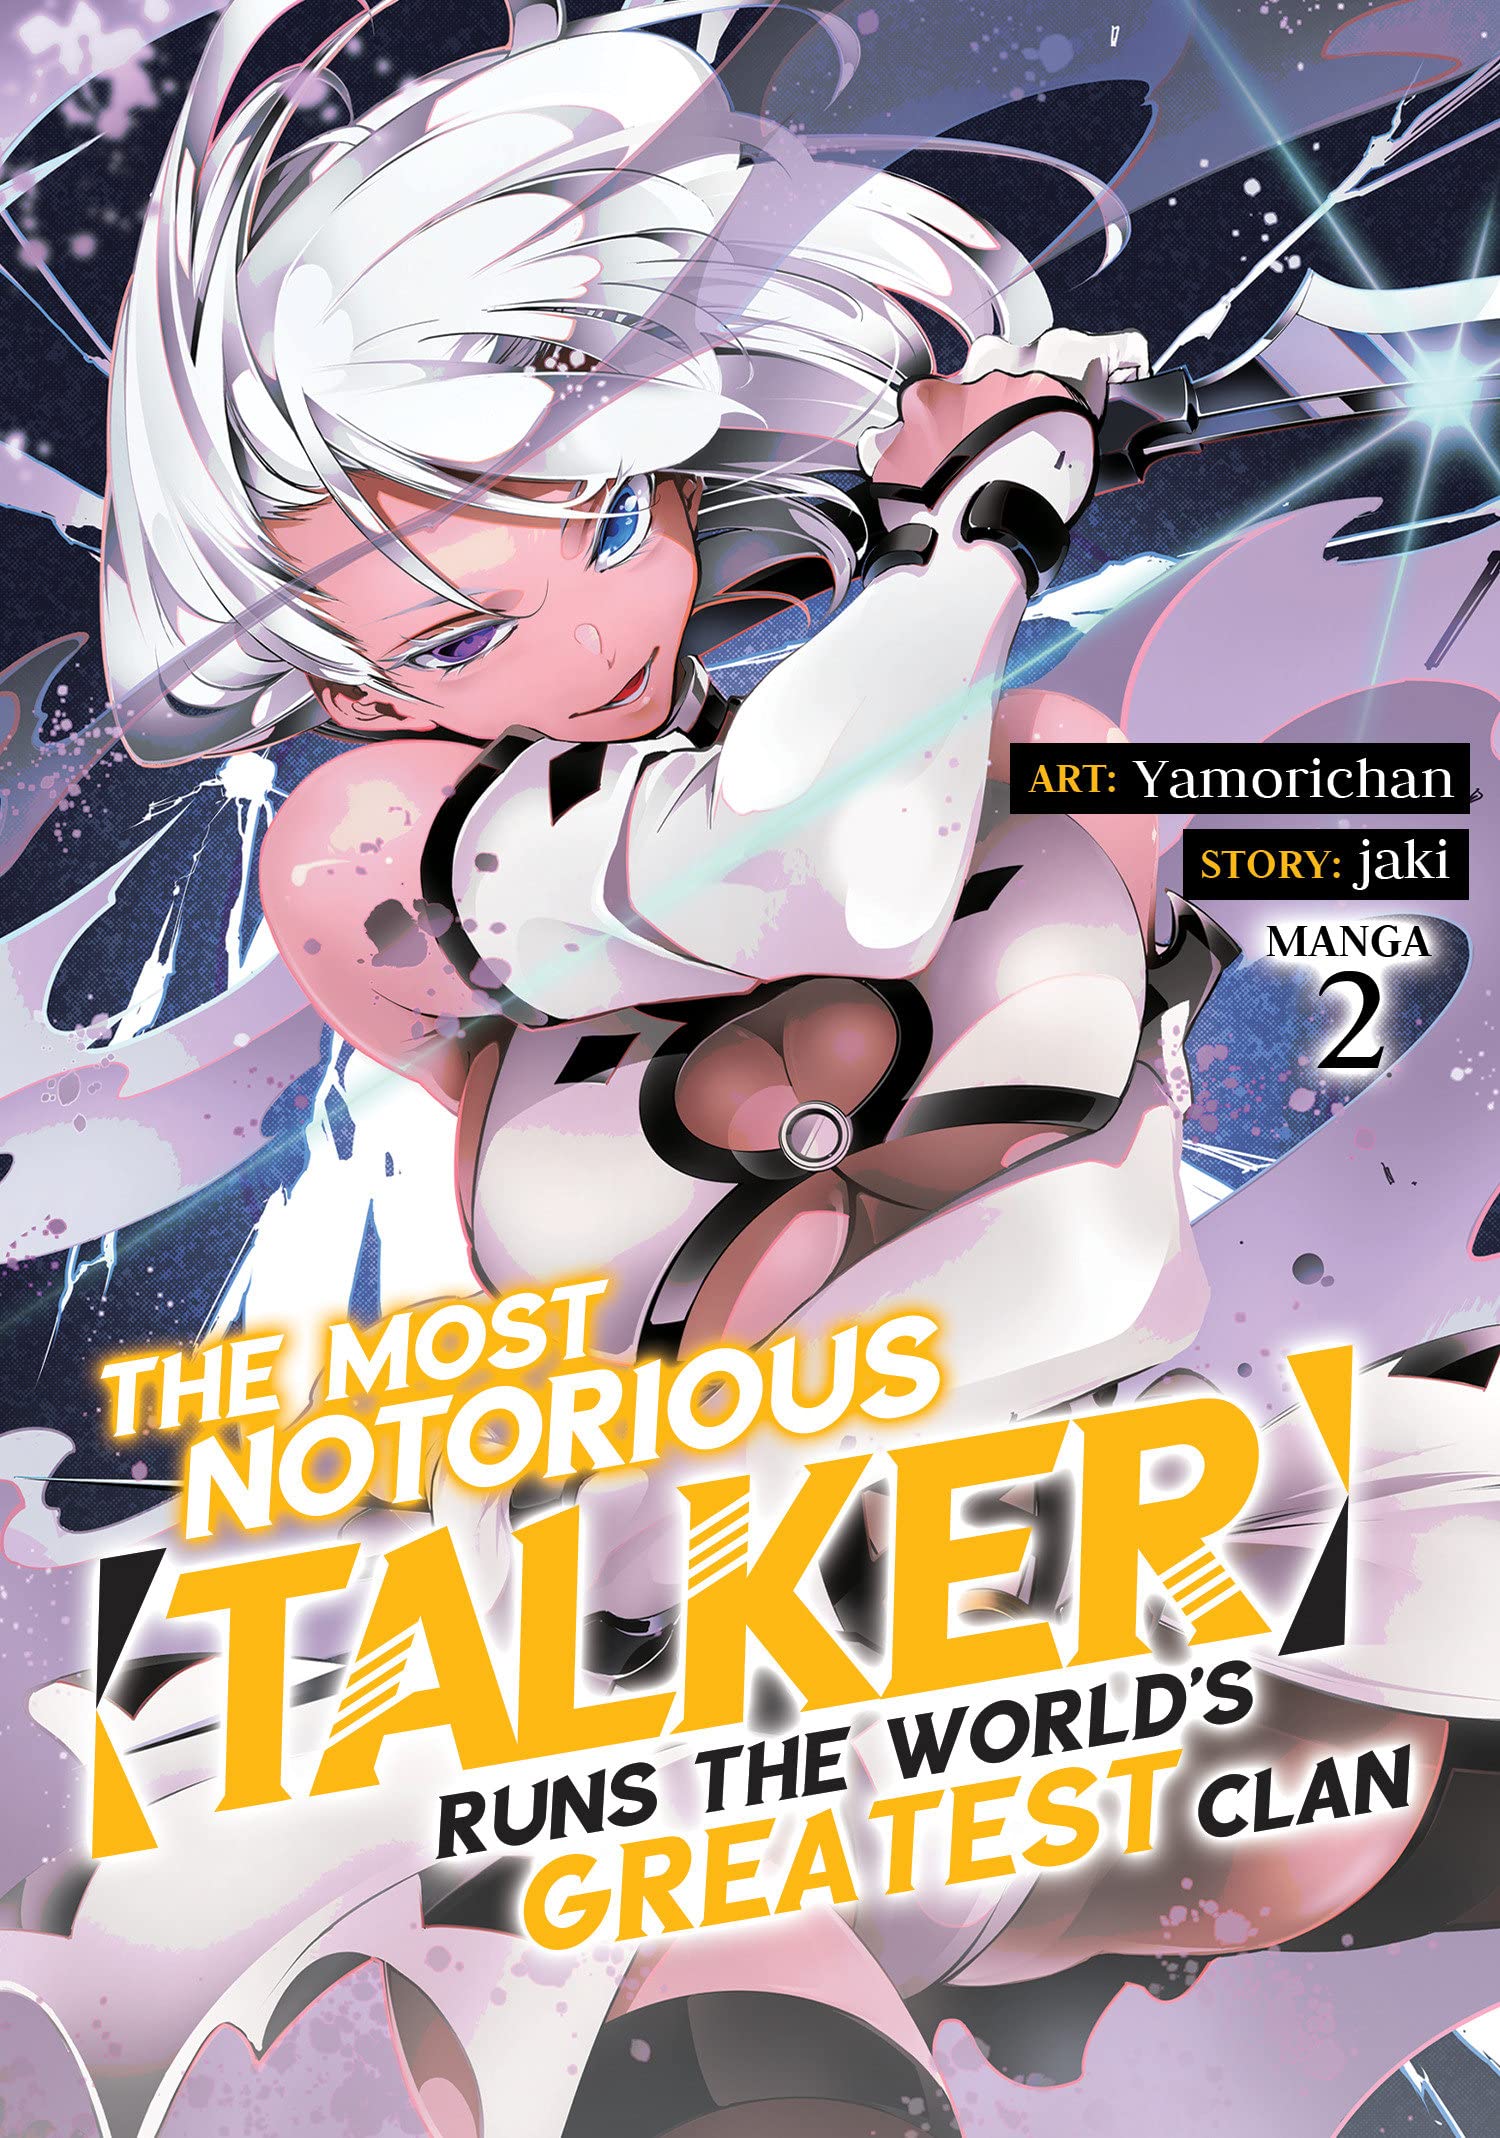 The Most Notorious Talker Runs the Worlds Greatest Clan (Manga) Vol. 02